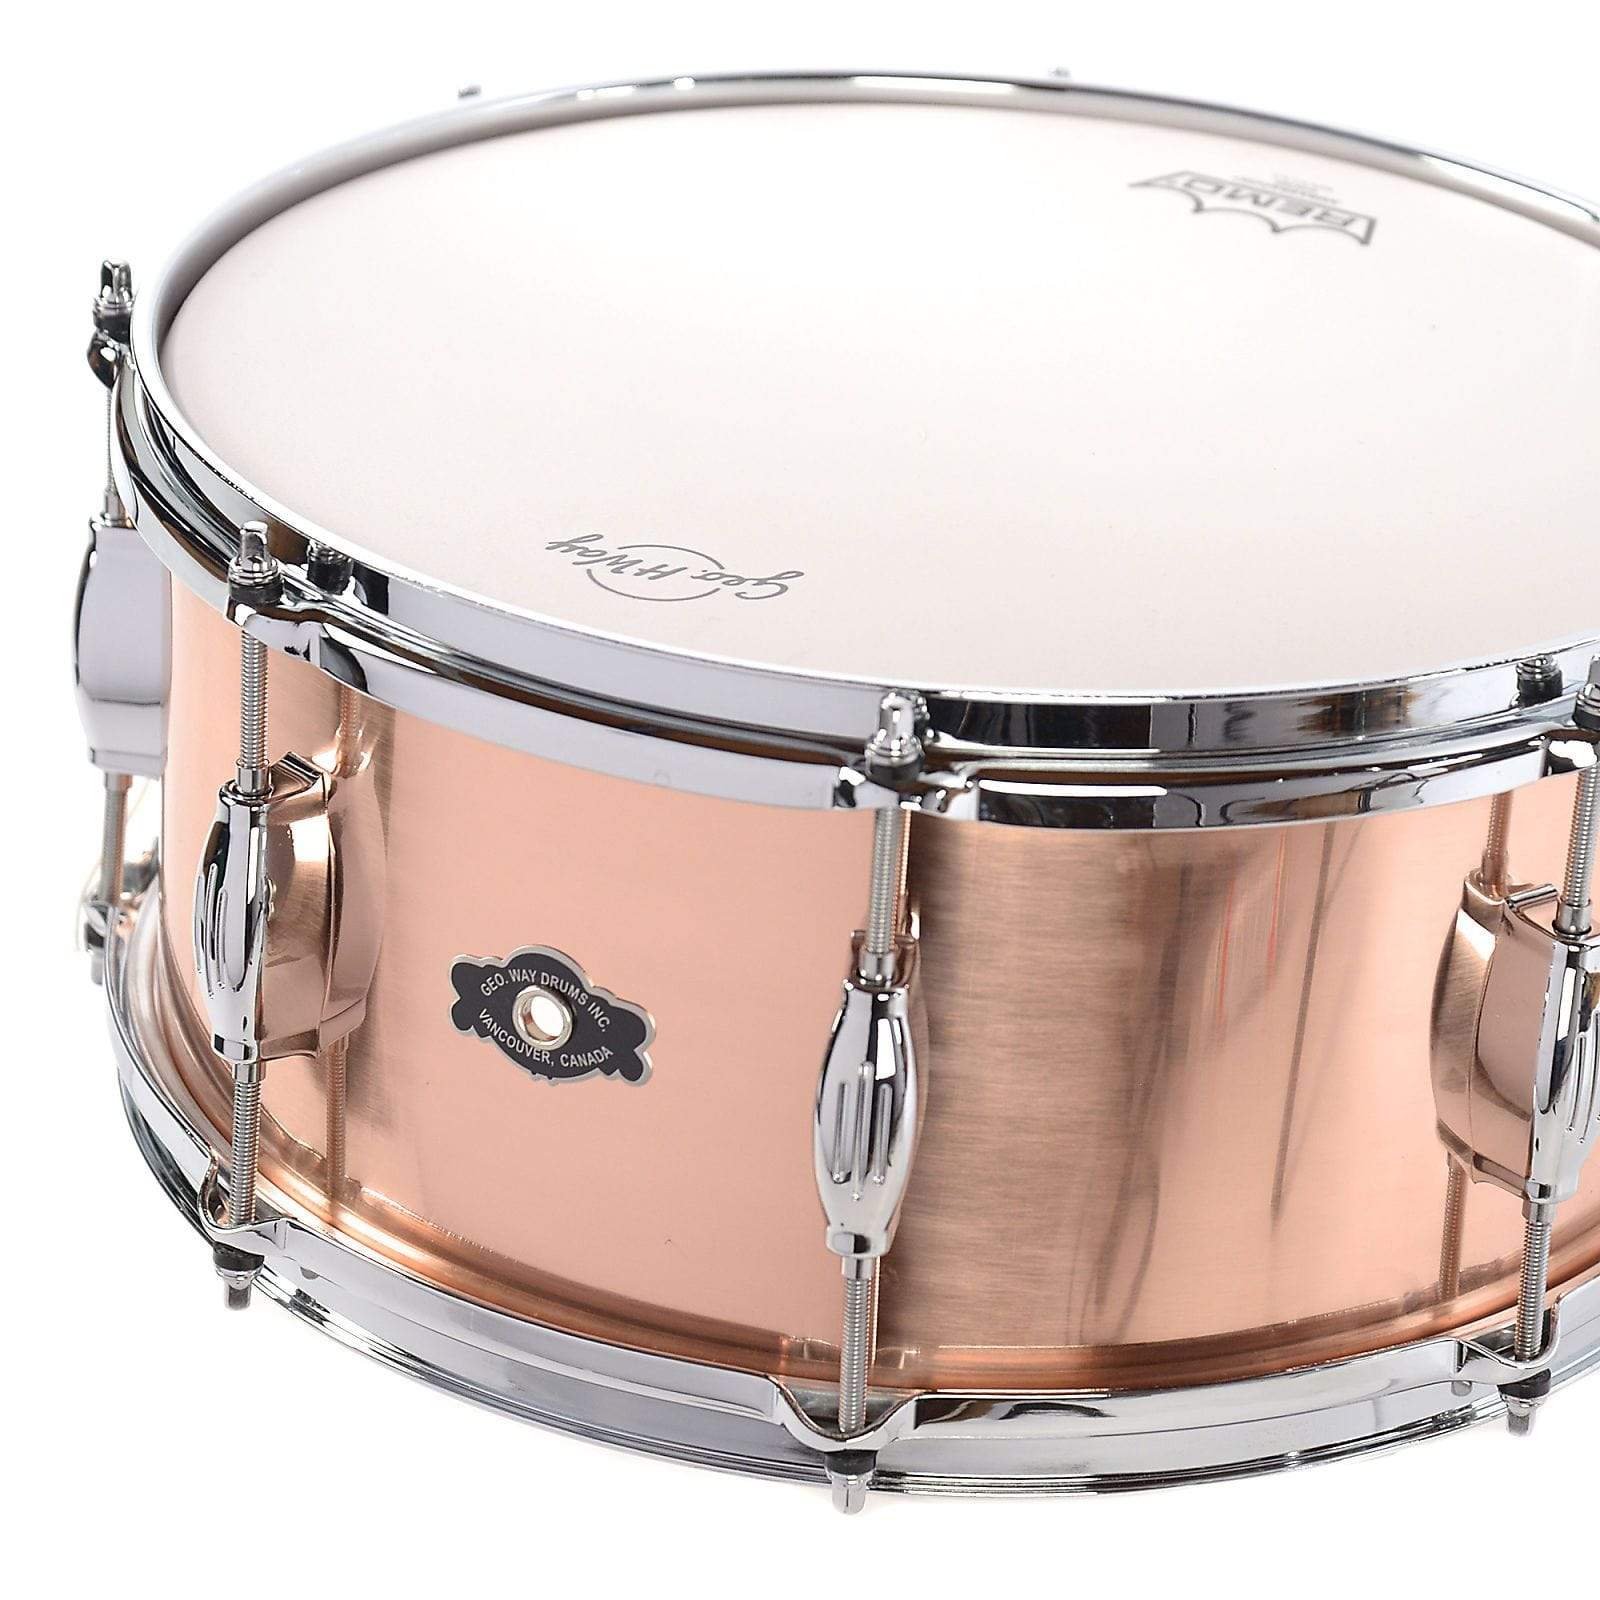 George Way 6.5x14 The Elkhart Medium Weight Copper Snare Drum w/Triple Flange Hoops Polished Finish Drums and Percussion / Acoustic Drums / Snare